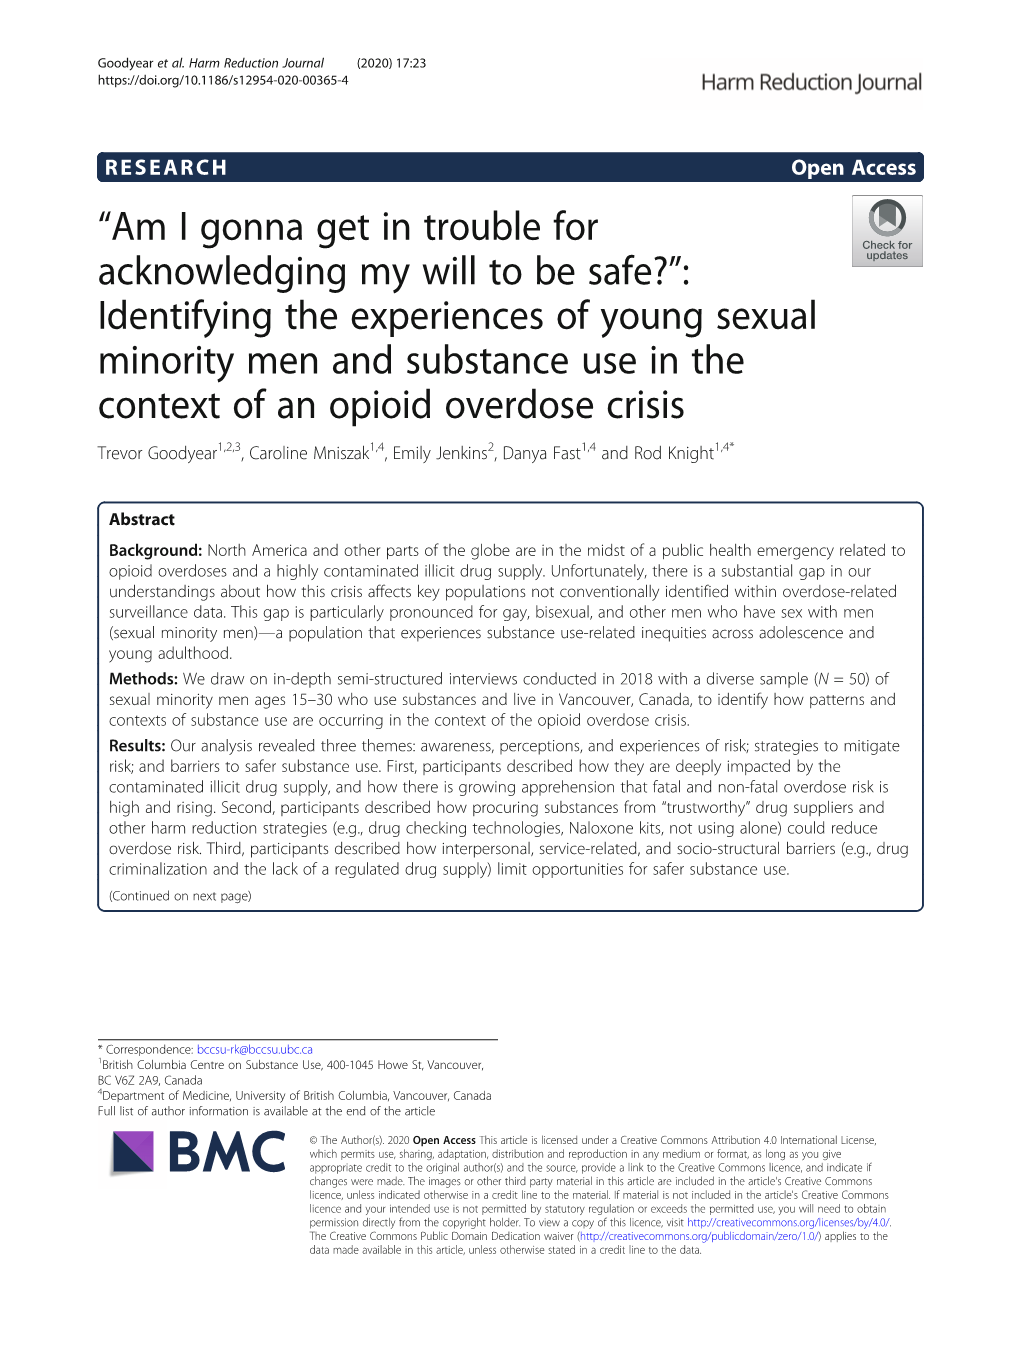 Identifying the Experiences of Young Sexual Minority